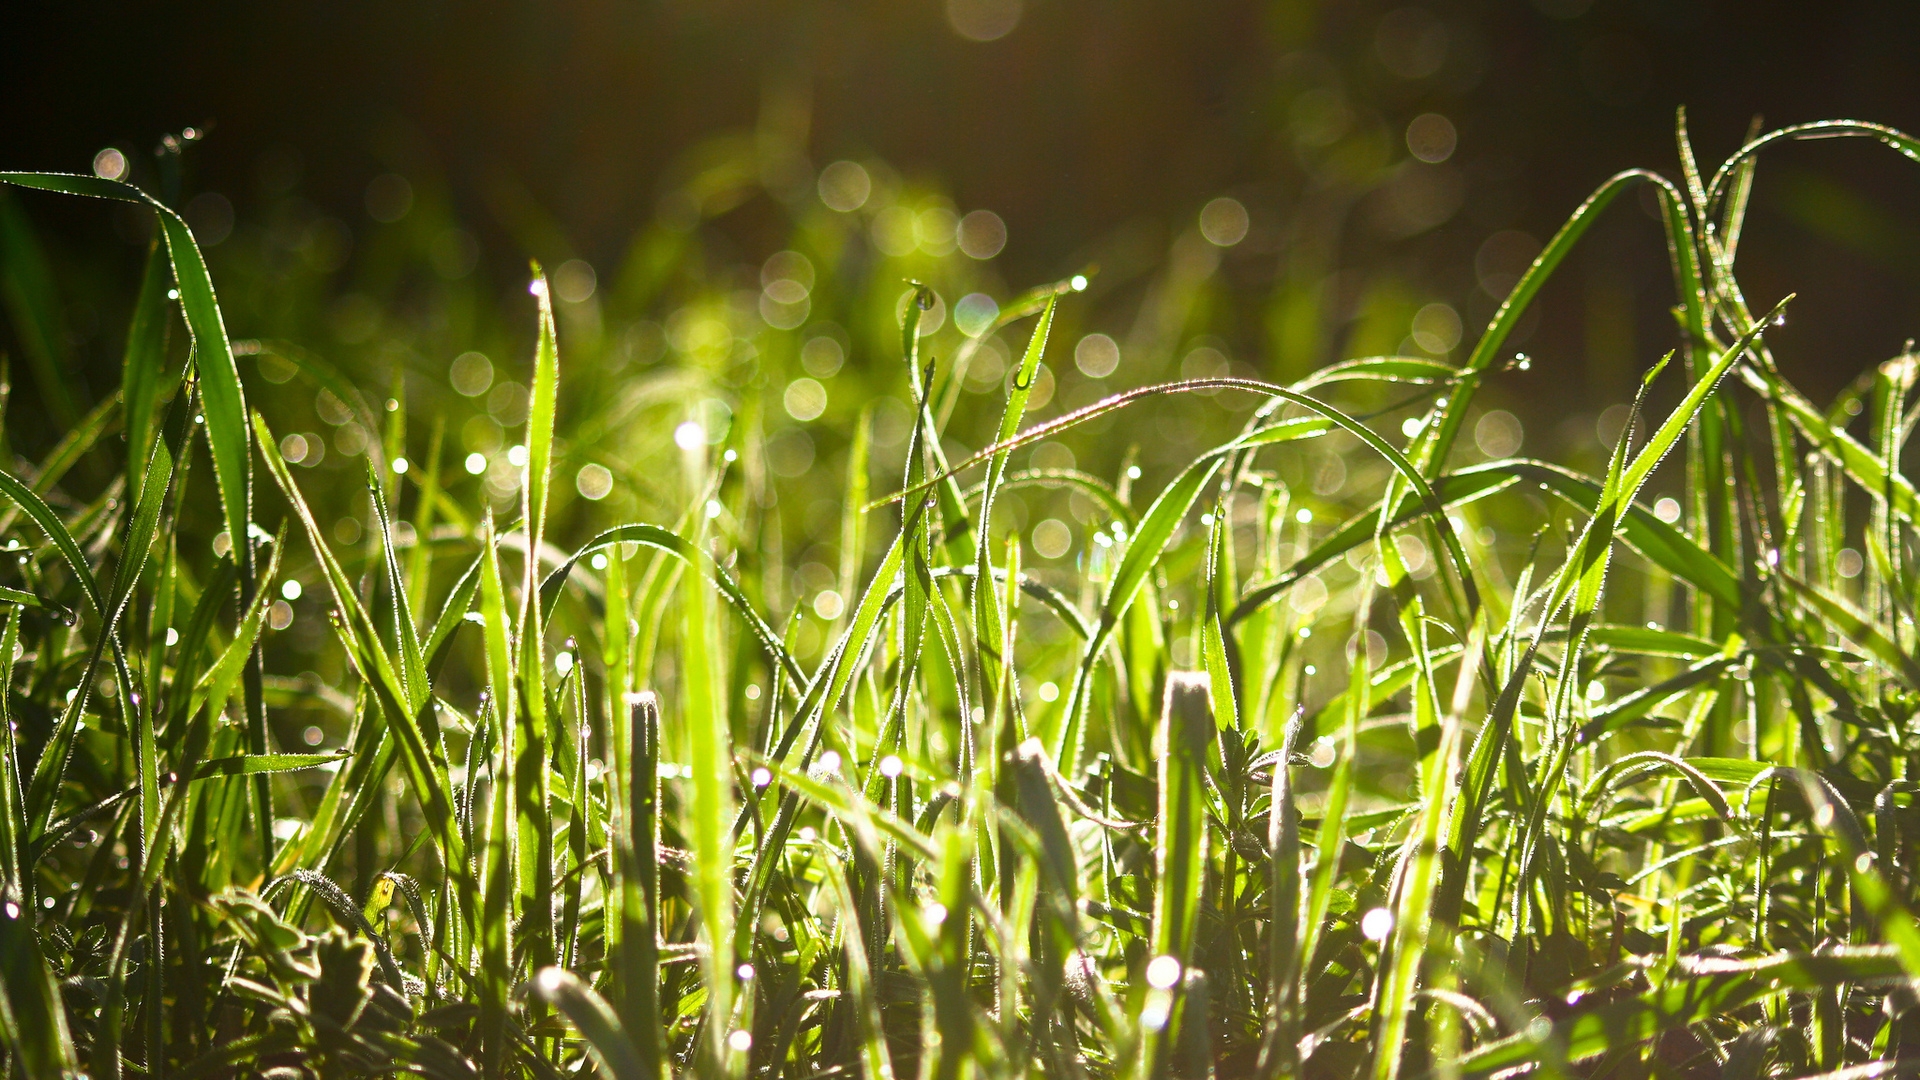 Wet Grass In The Sun  for 1920 x 1080 HDTV 1080p resolution